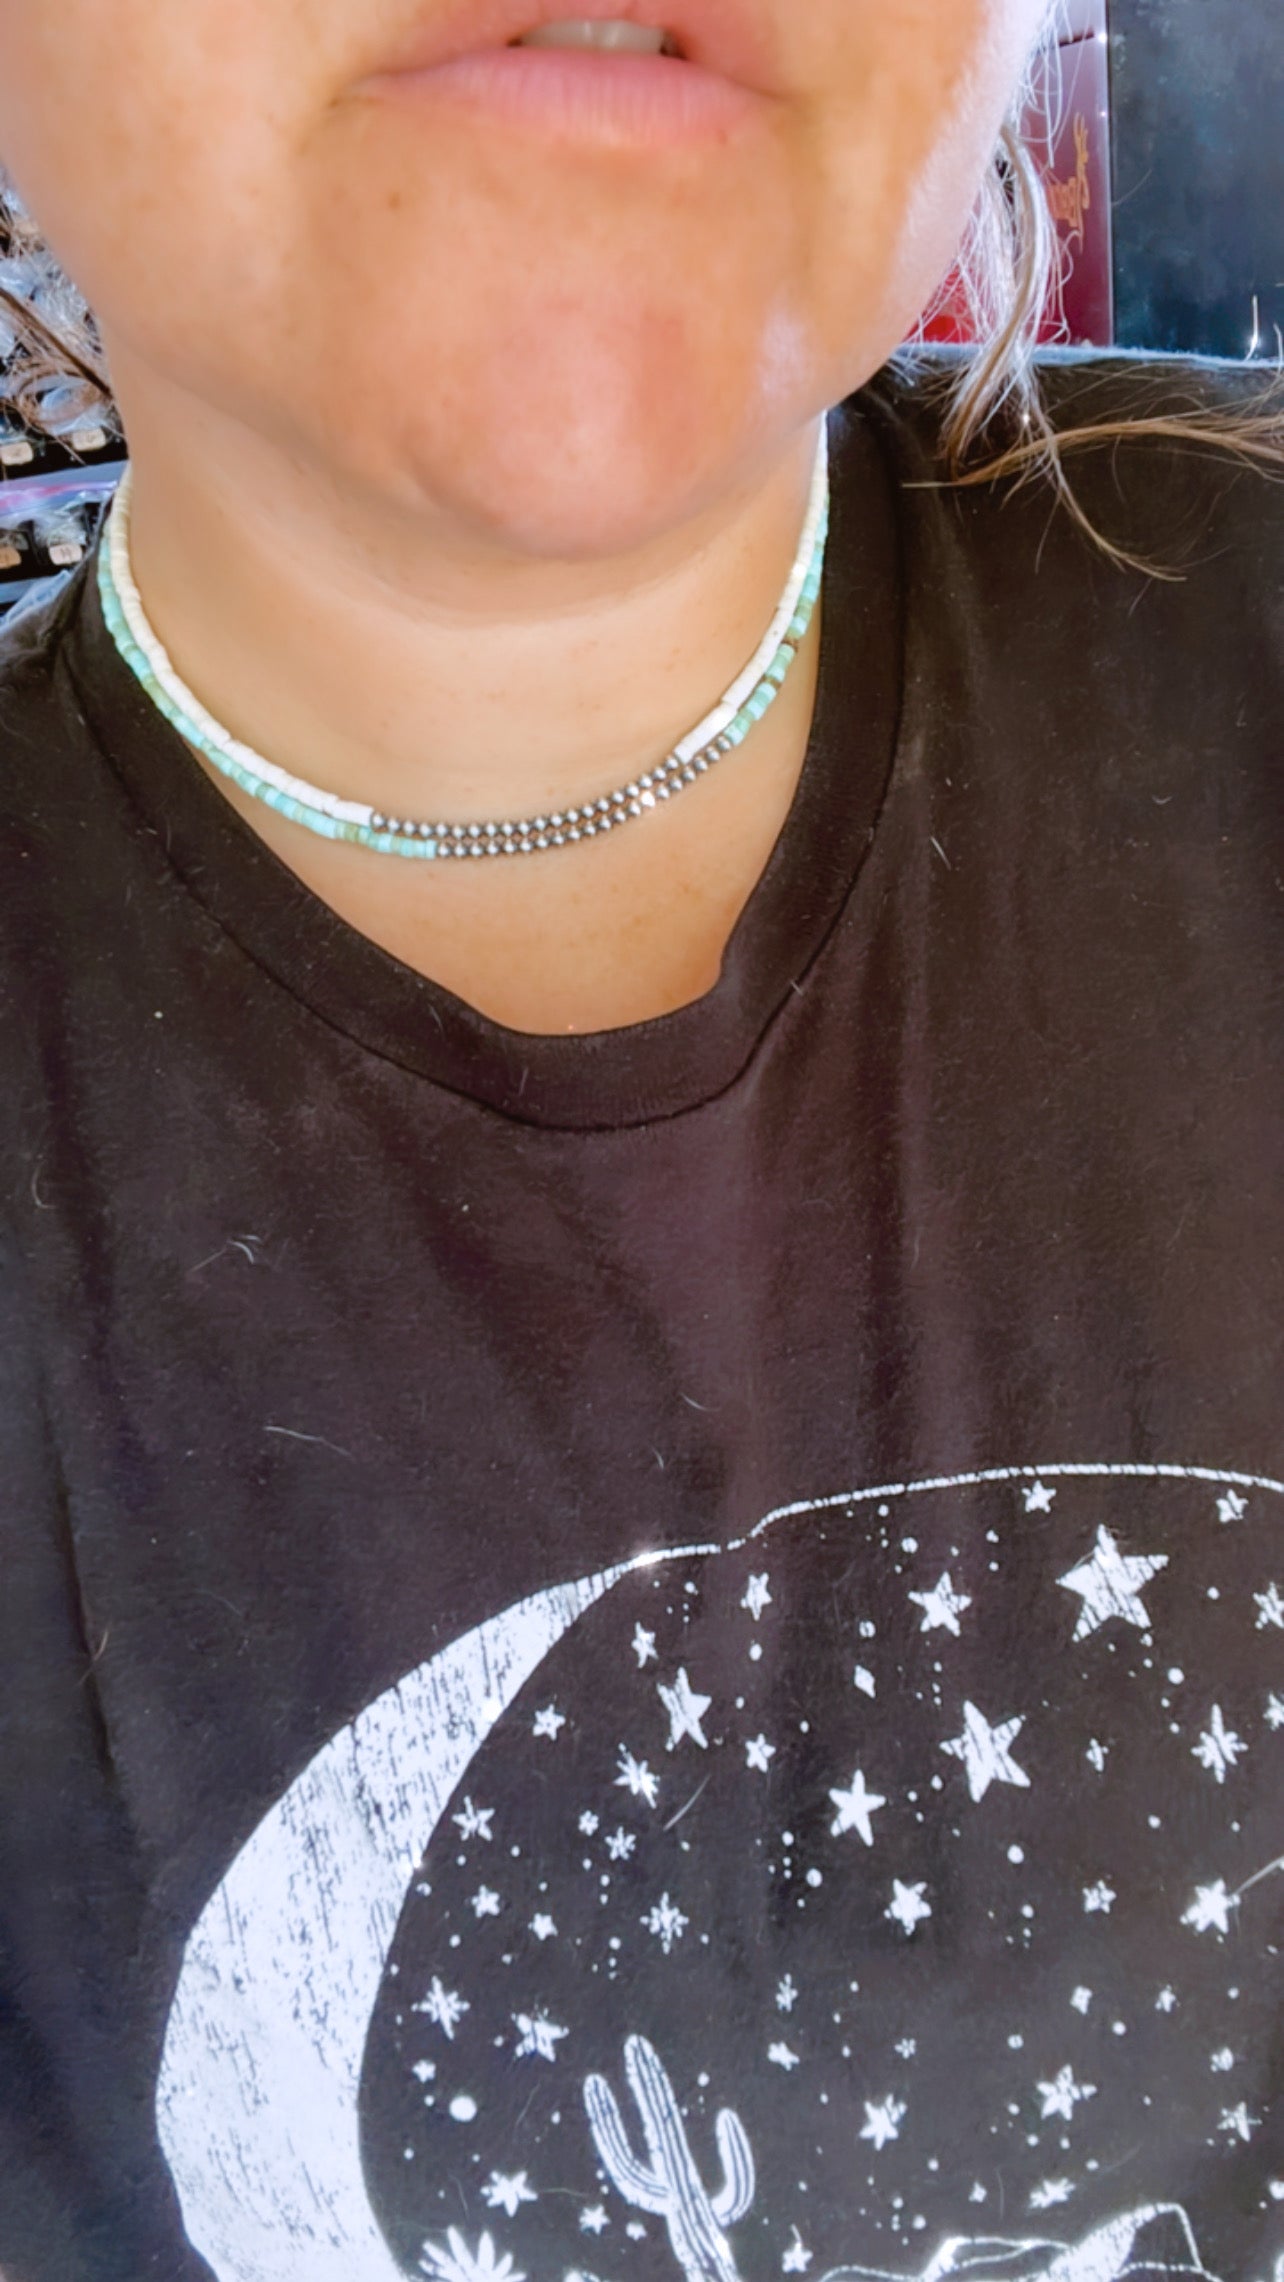 Albuquerque 3 mm sterling silver pearls choker with magnesite turquoise heishi